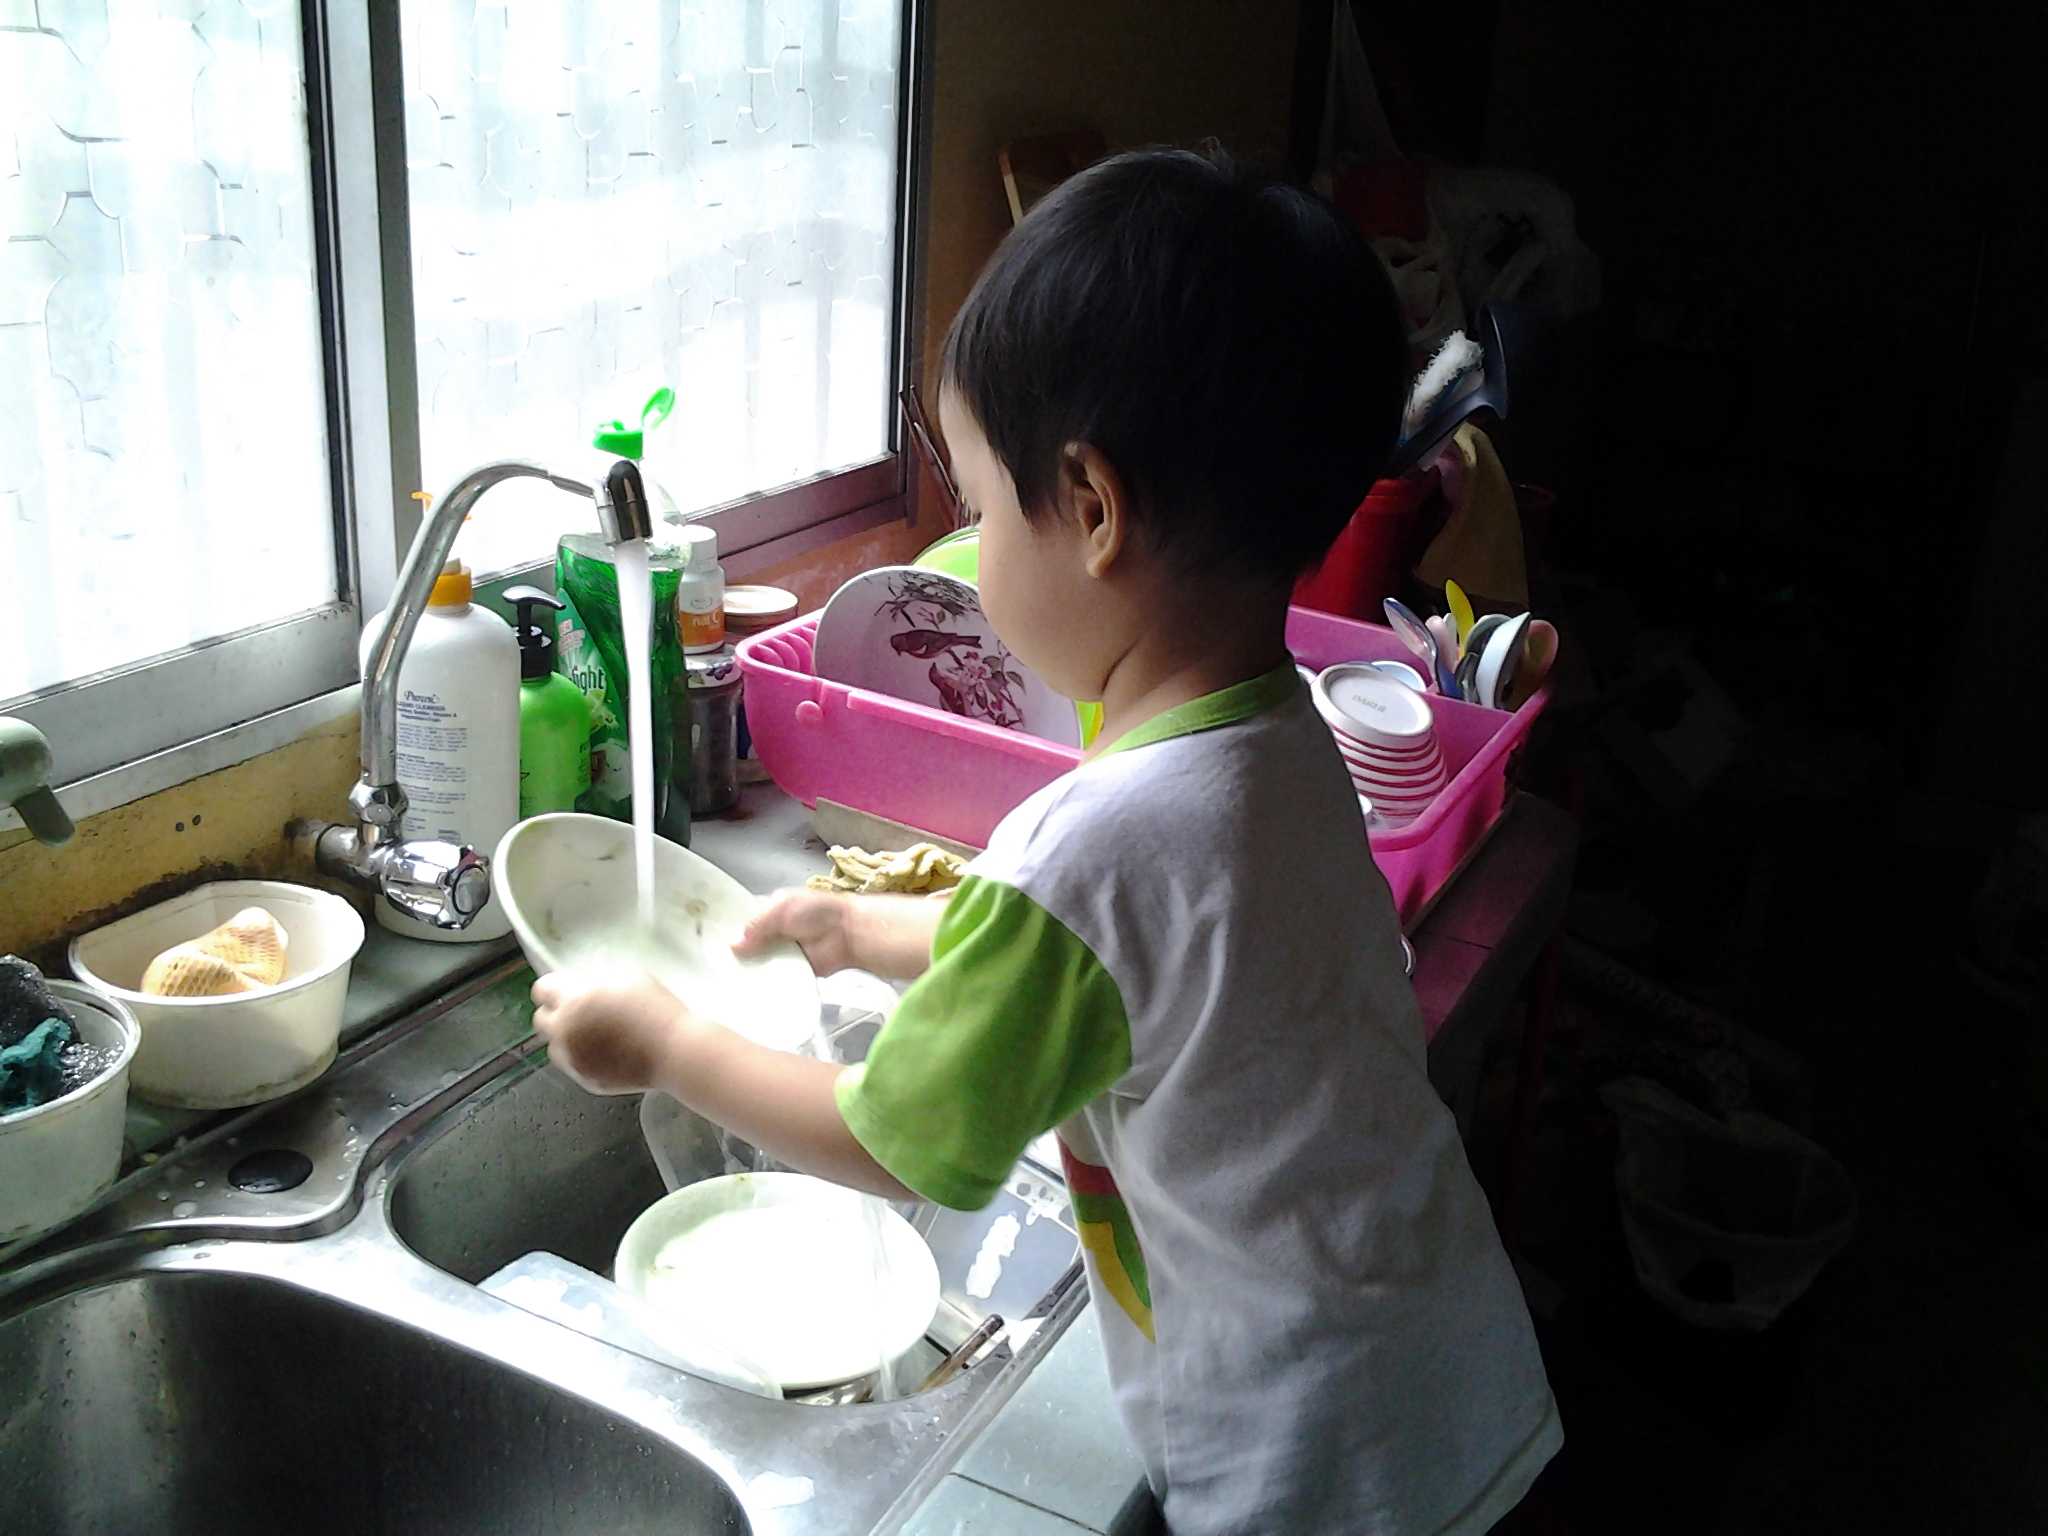 My daughter is washing dishes